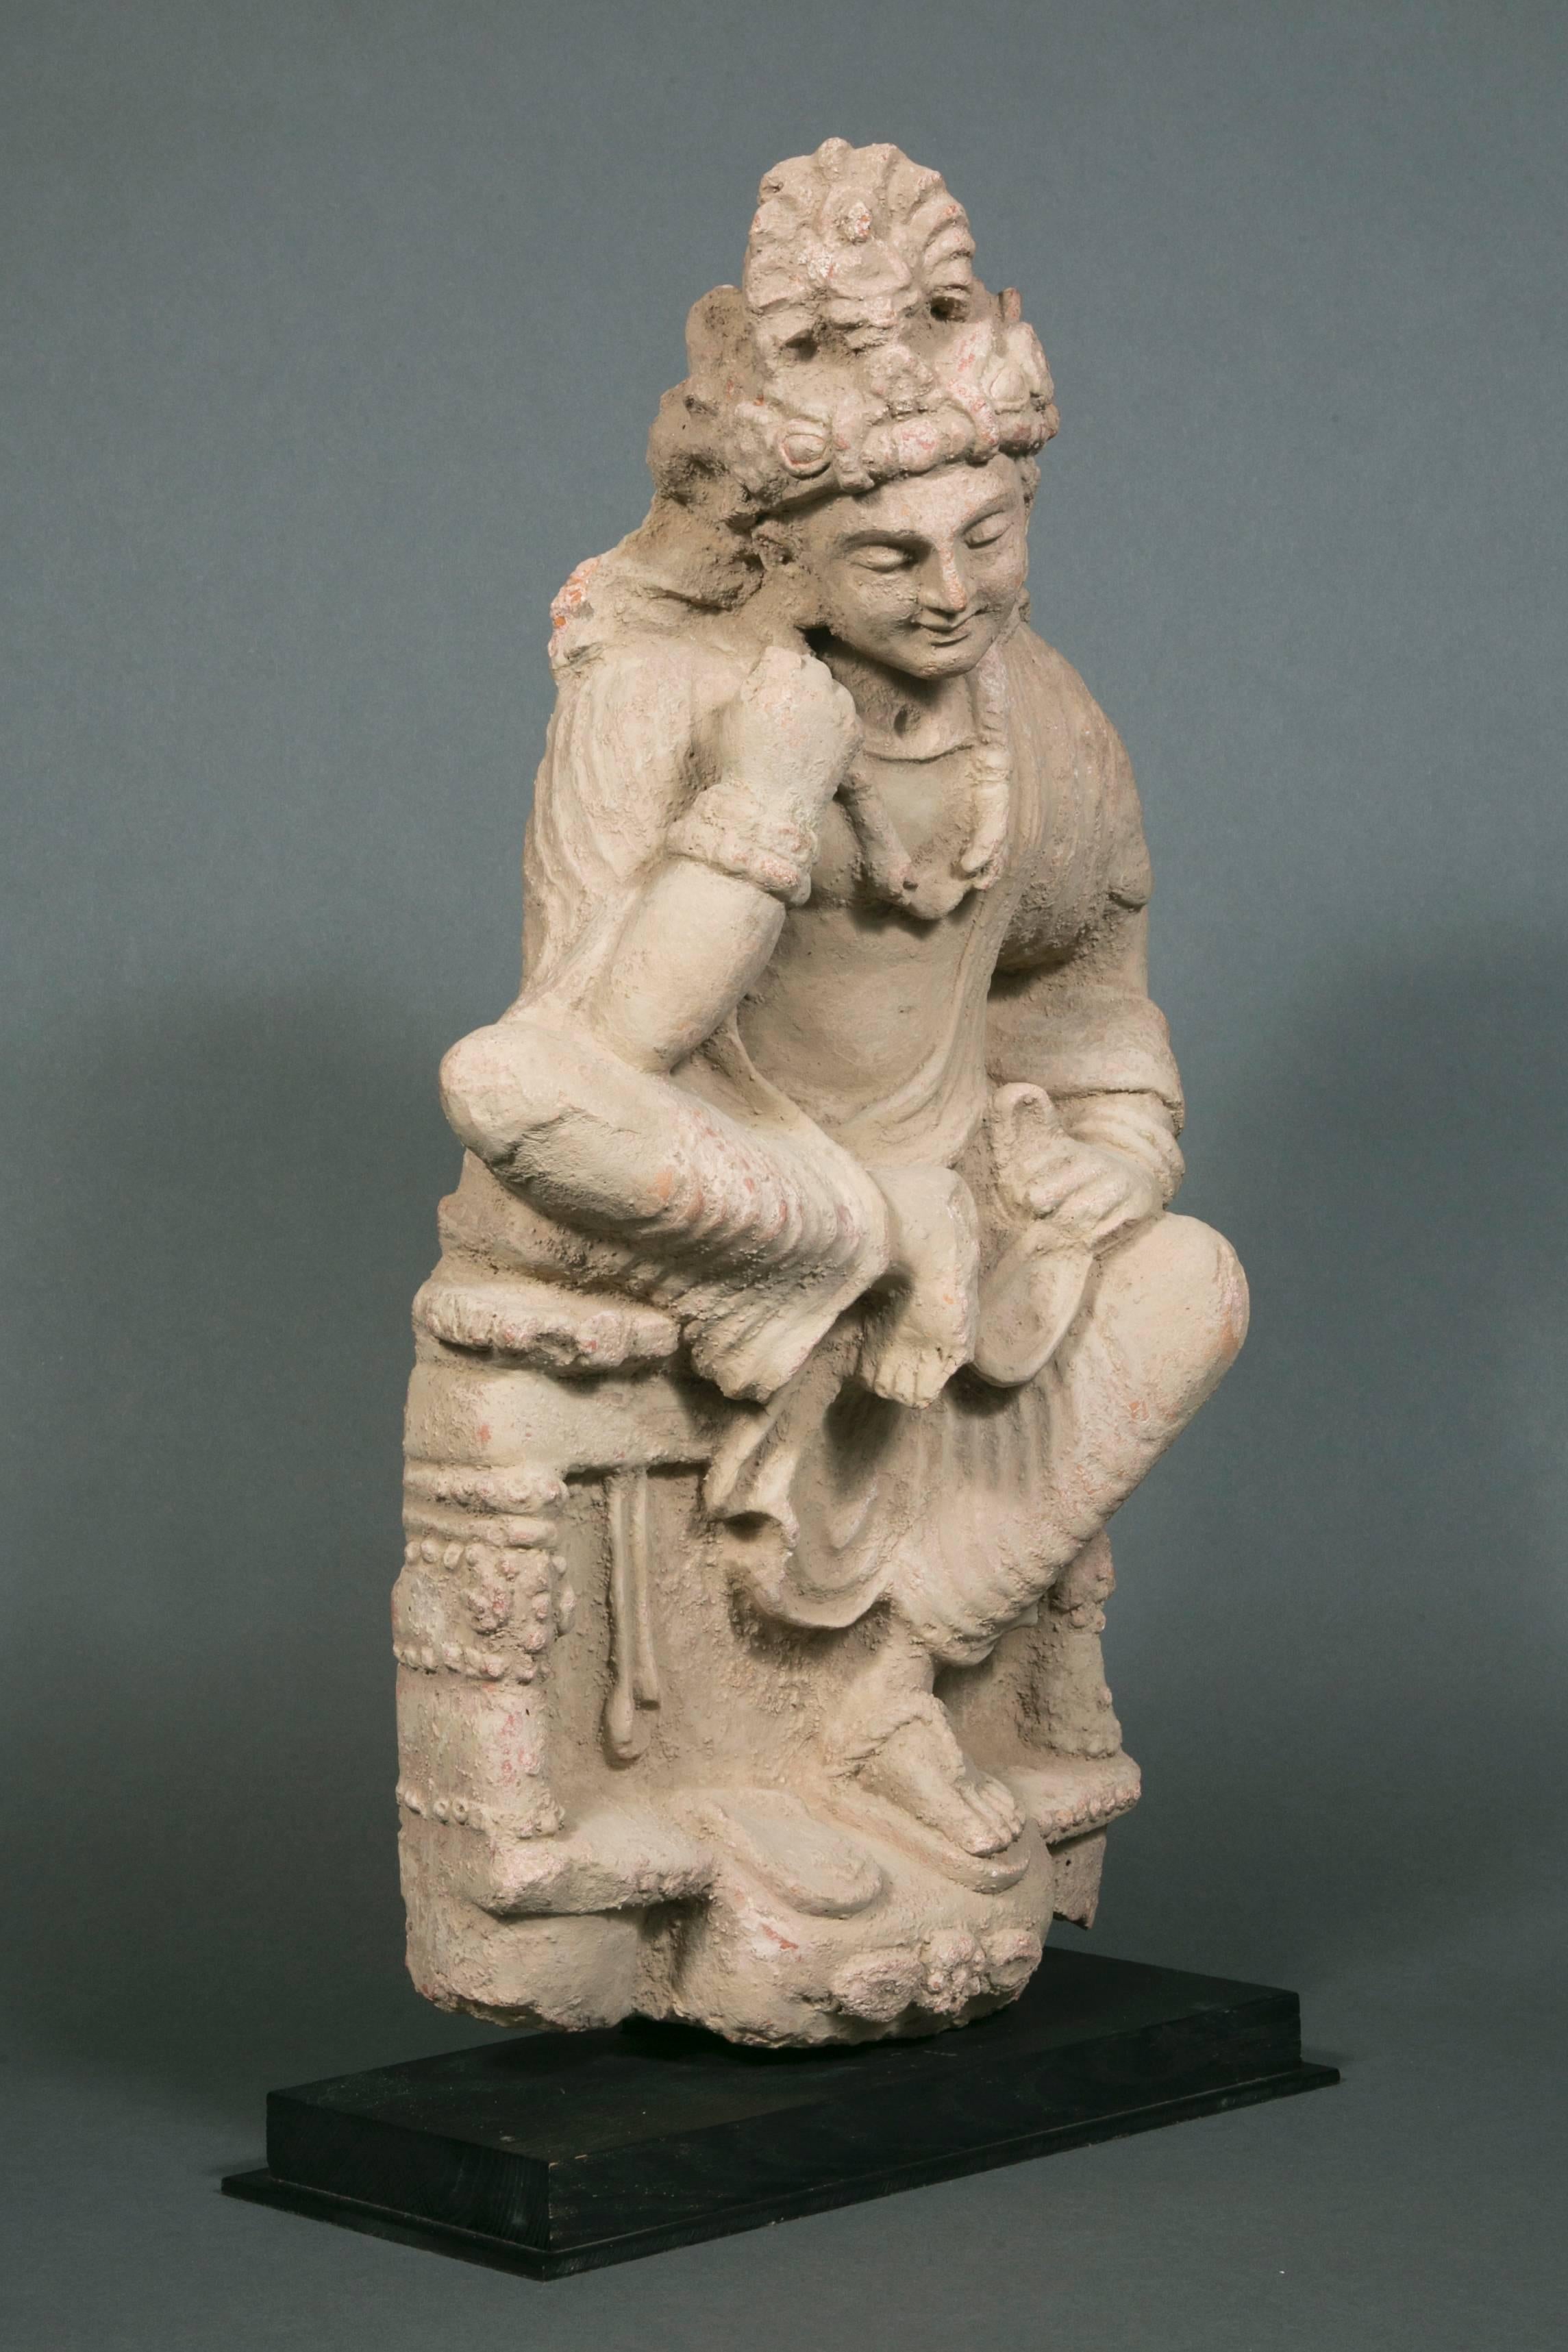 Bodhisattva - enthroned in a position of relaxation.
Terracotta.
Time alleged Pakistan-Afghanistan, Greco-Buddhist Art, Gandhara region. (IInd-5th century after J.C.)
Sold with a thermoluminescence certificate.